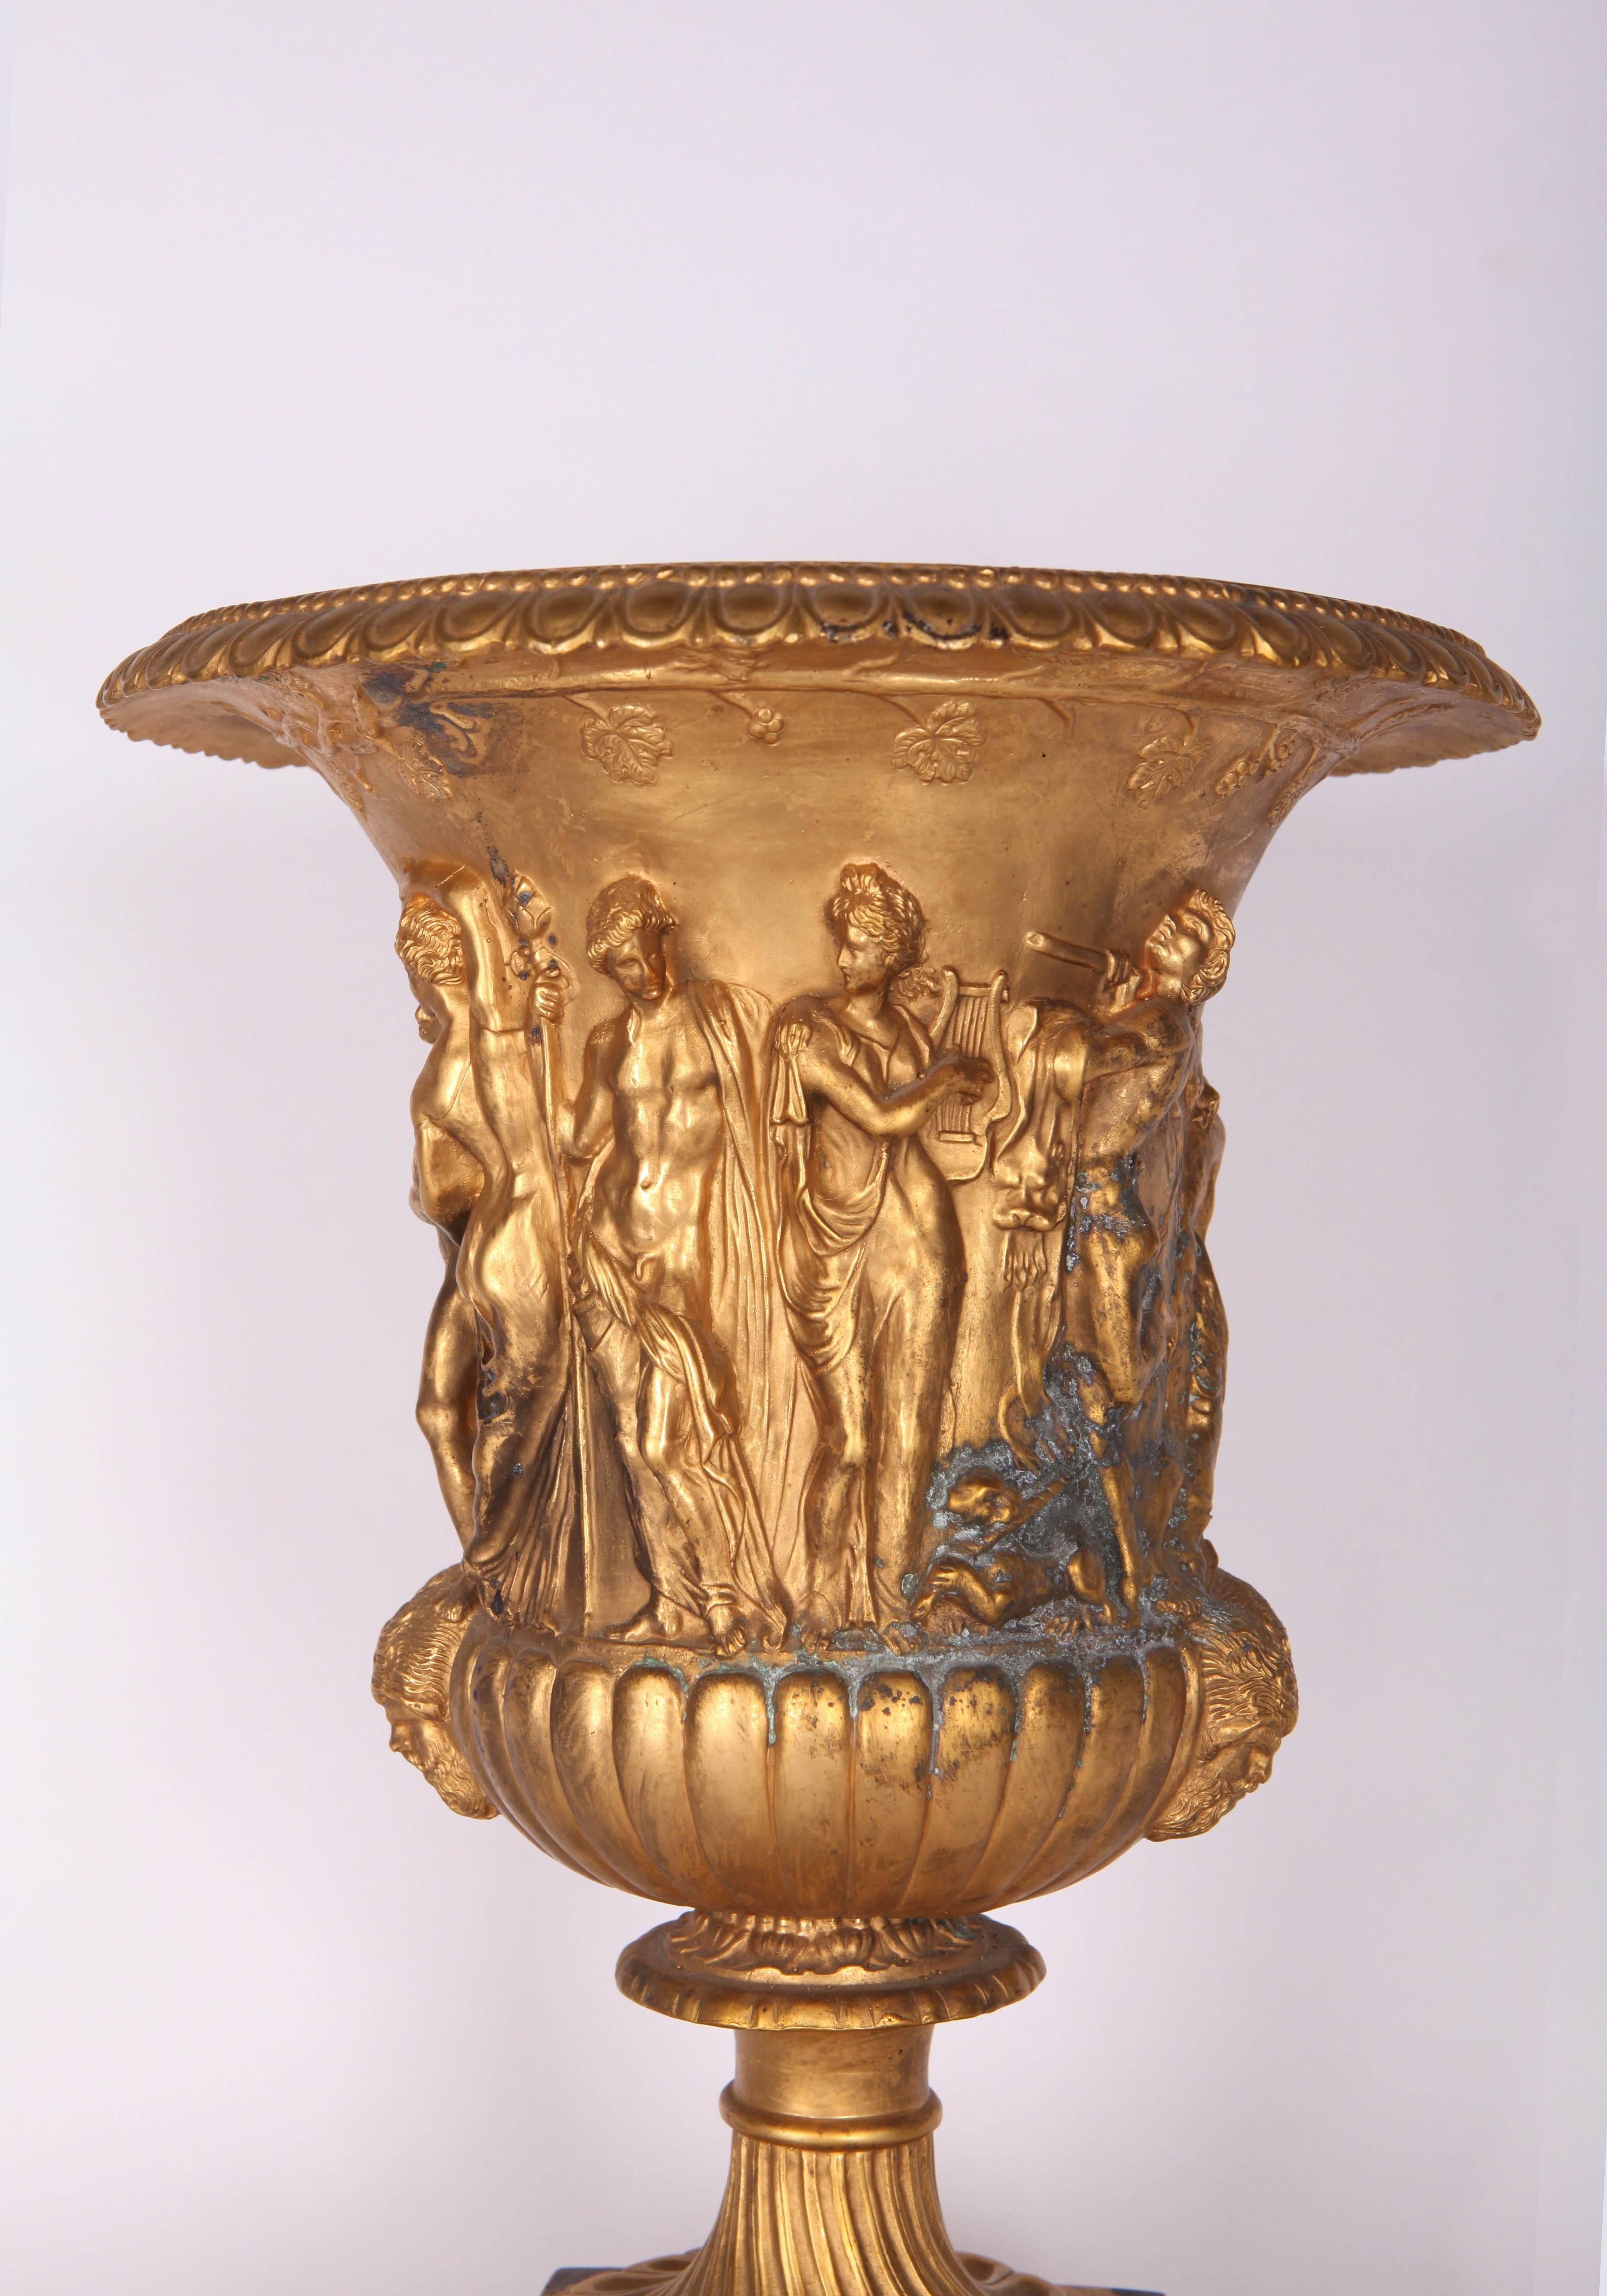 Cast 19th Century French Gilt Bronze Urn After the Antique For Sale